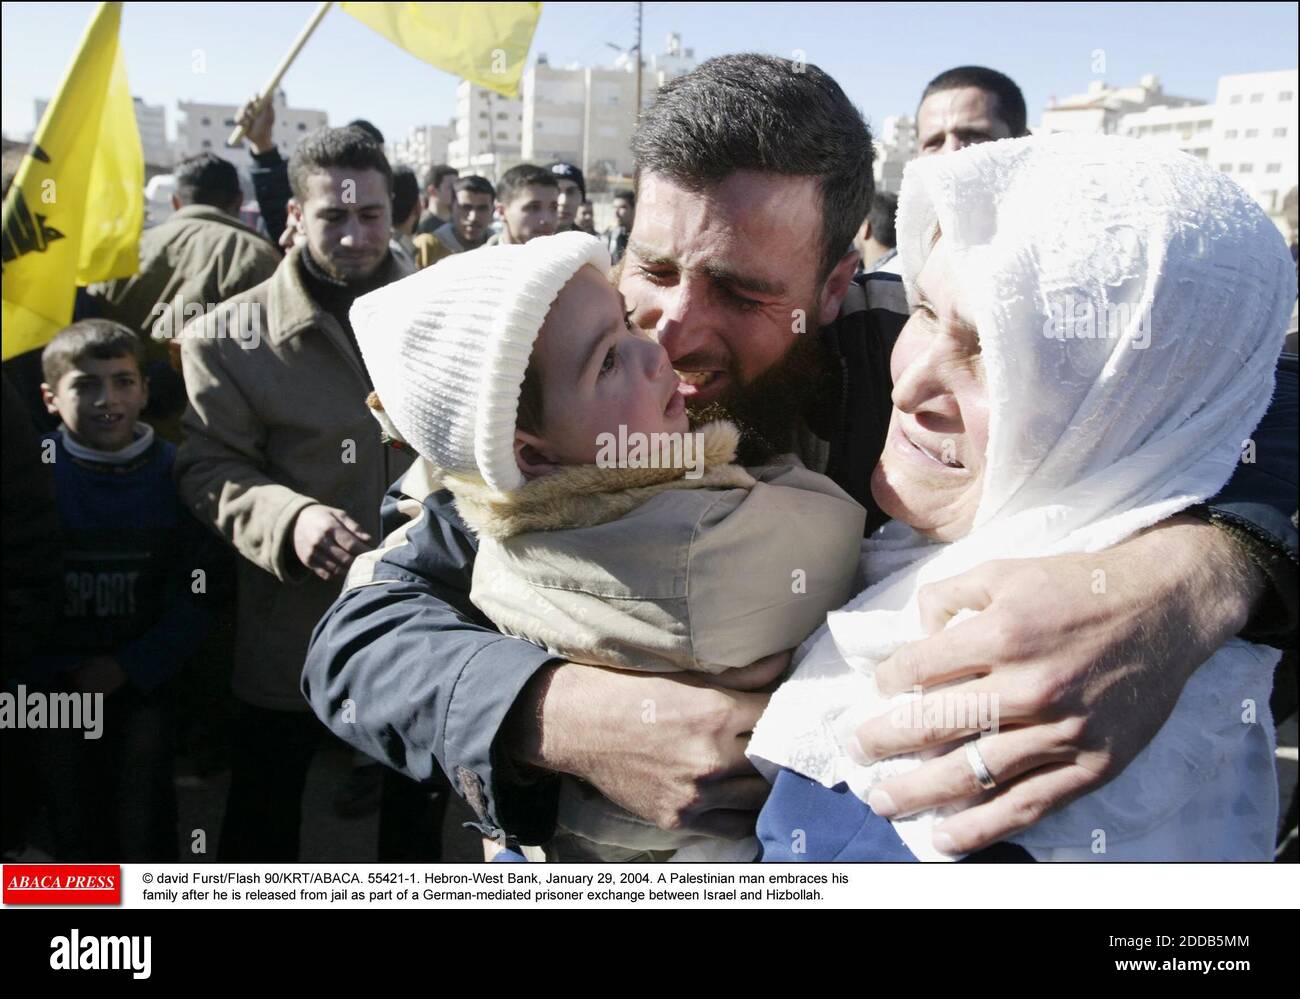 NO FILM, NO VIDEO, NO TV, NO DOCUMENTARY - © David Furst/Flash 90/KRT/ABACA. 55421-1. Hebron-West Bank, January 29, 2004. A Palestinian man embraces his family after he is released from jail as part of a German-mediated prisoner exchange between Israel and Hizbollah. Stock Photo